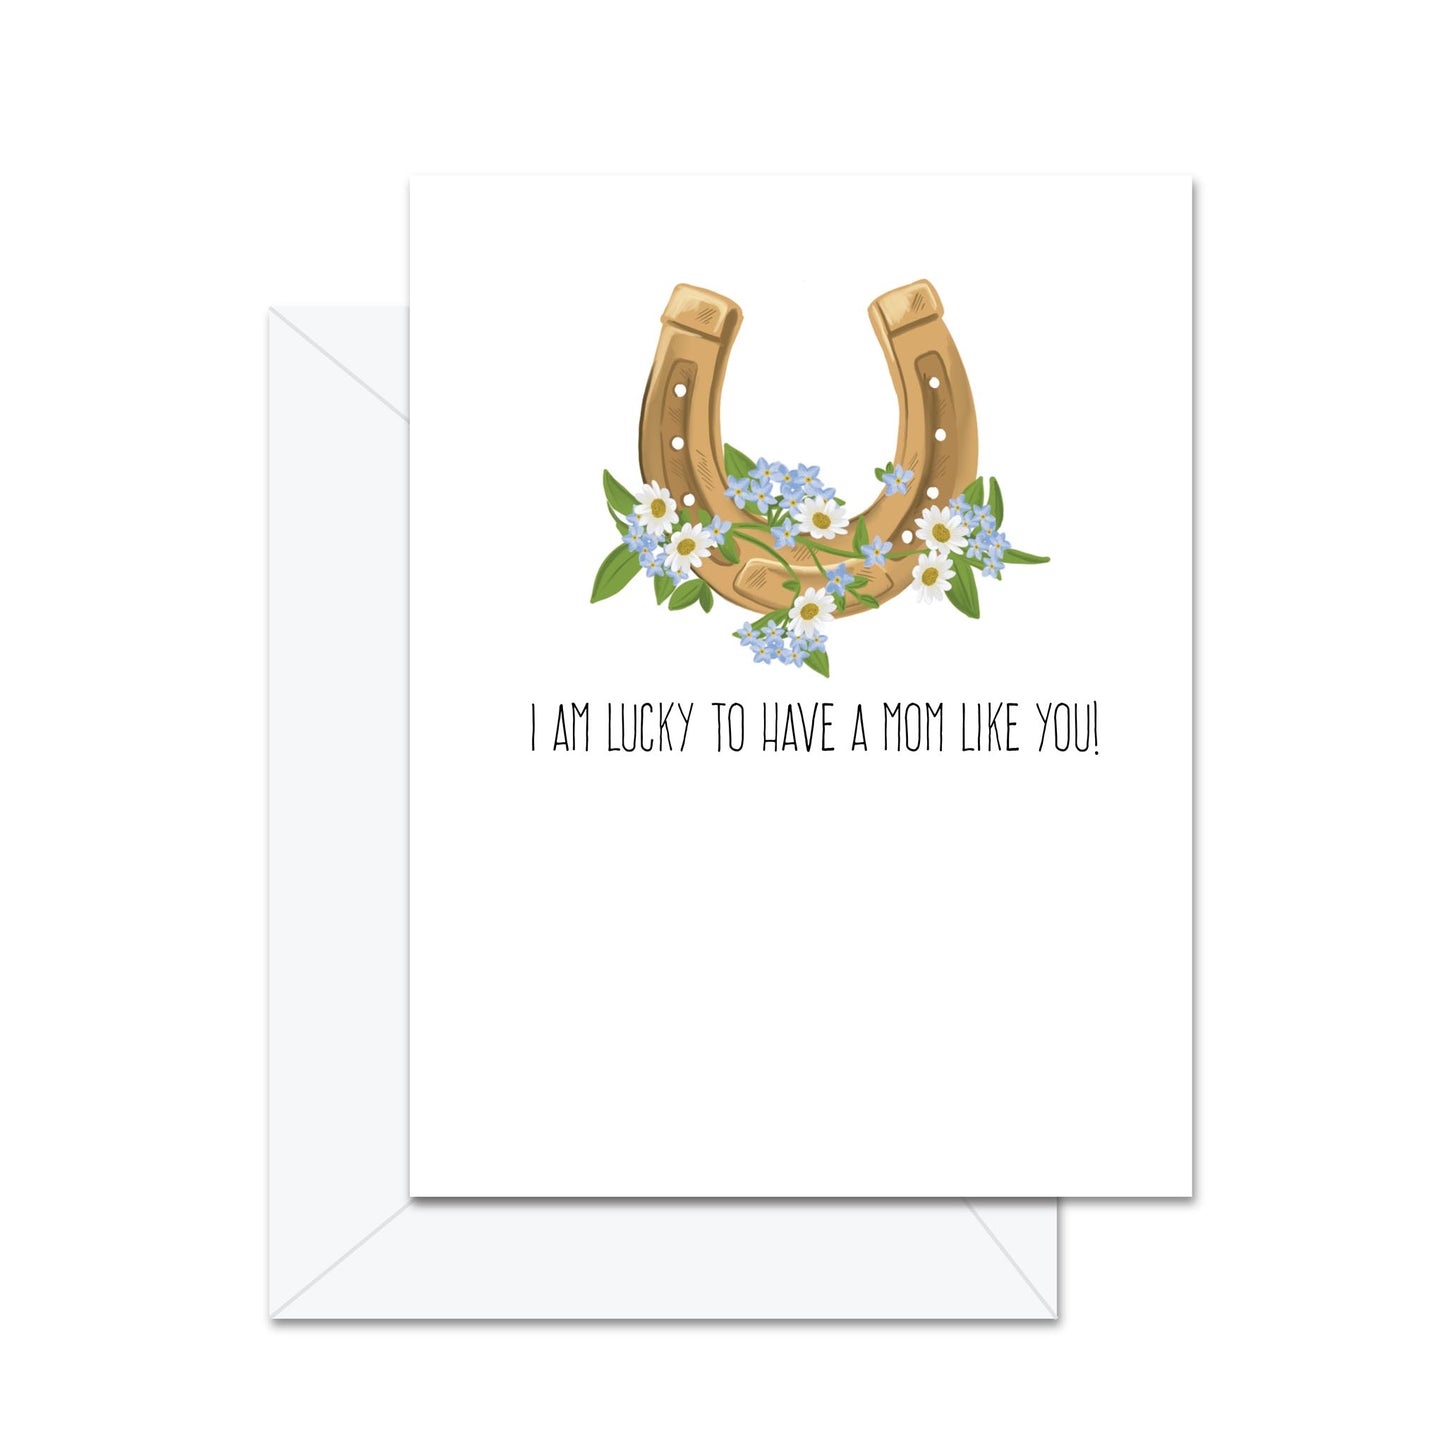 I Am So Lucky To Have A Mom Like You! - Greeting Card